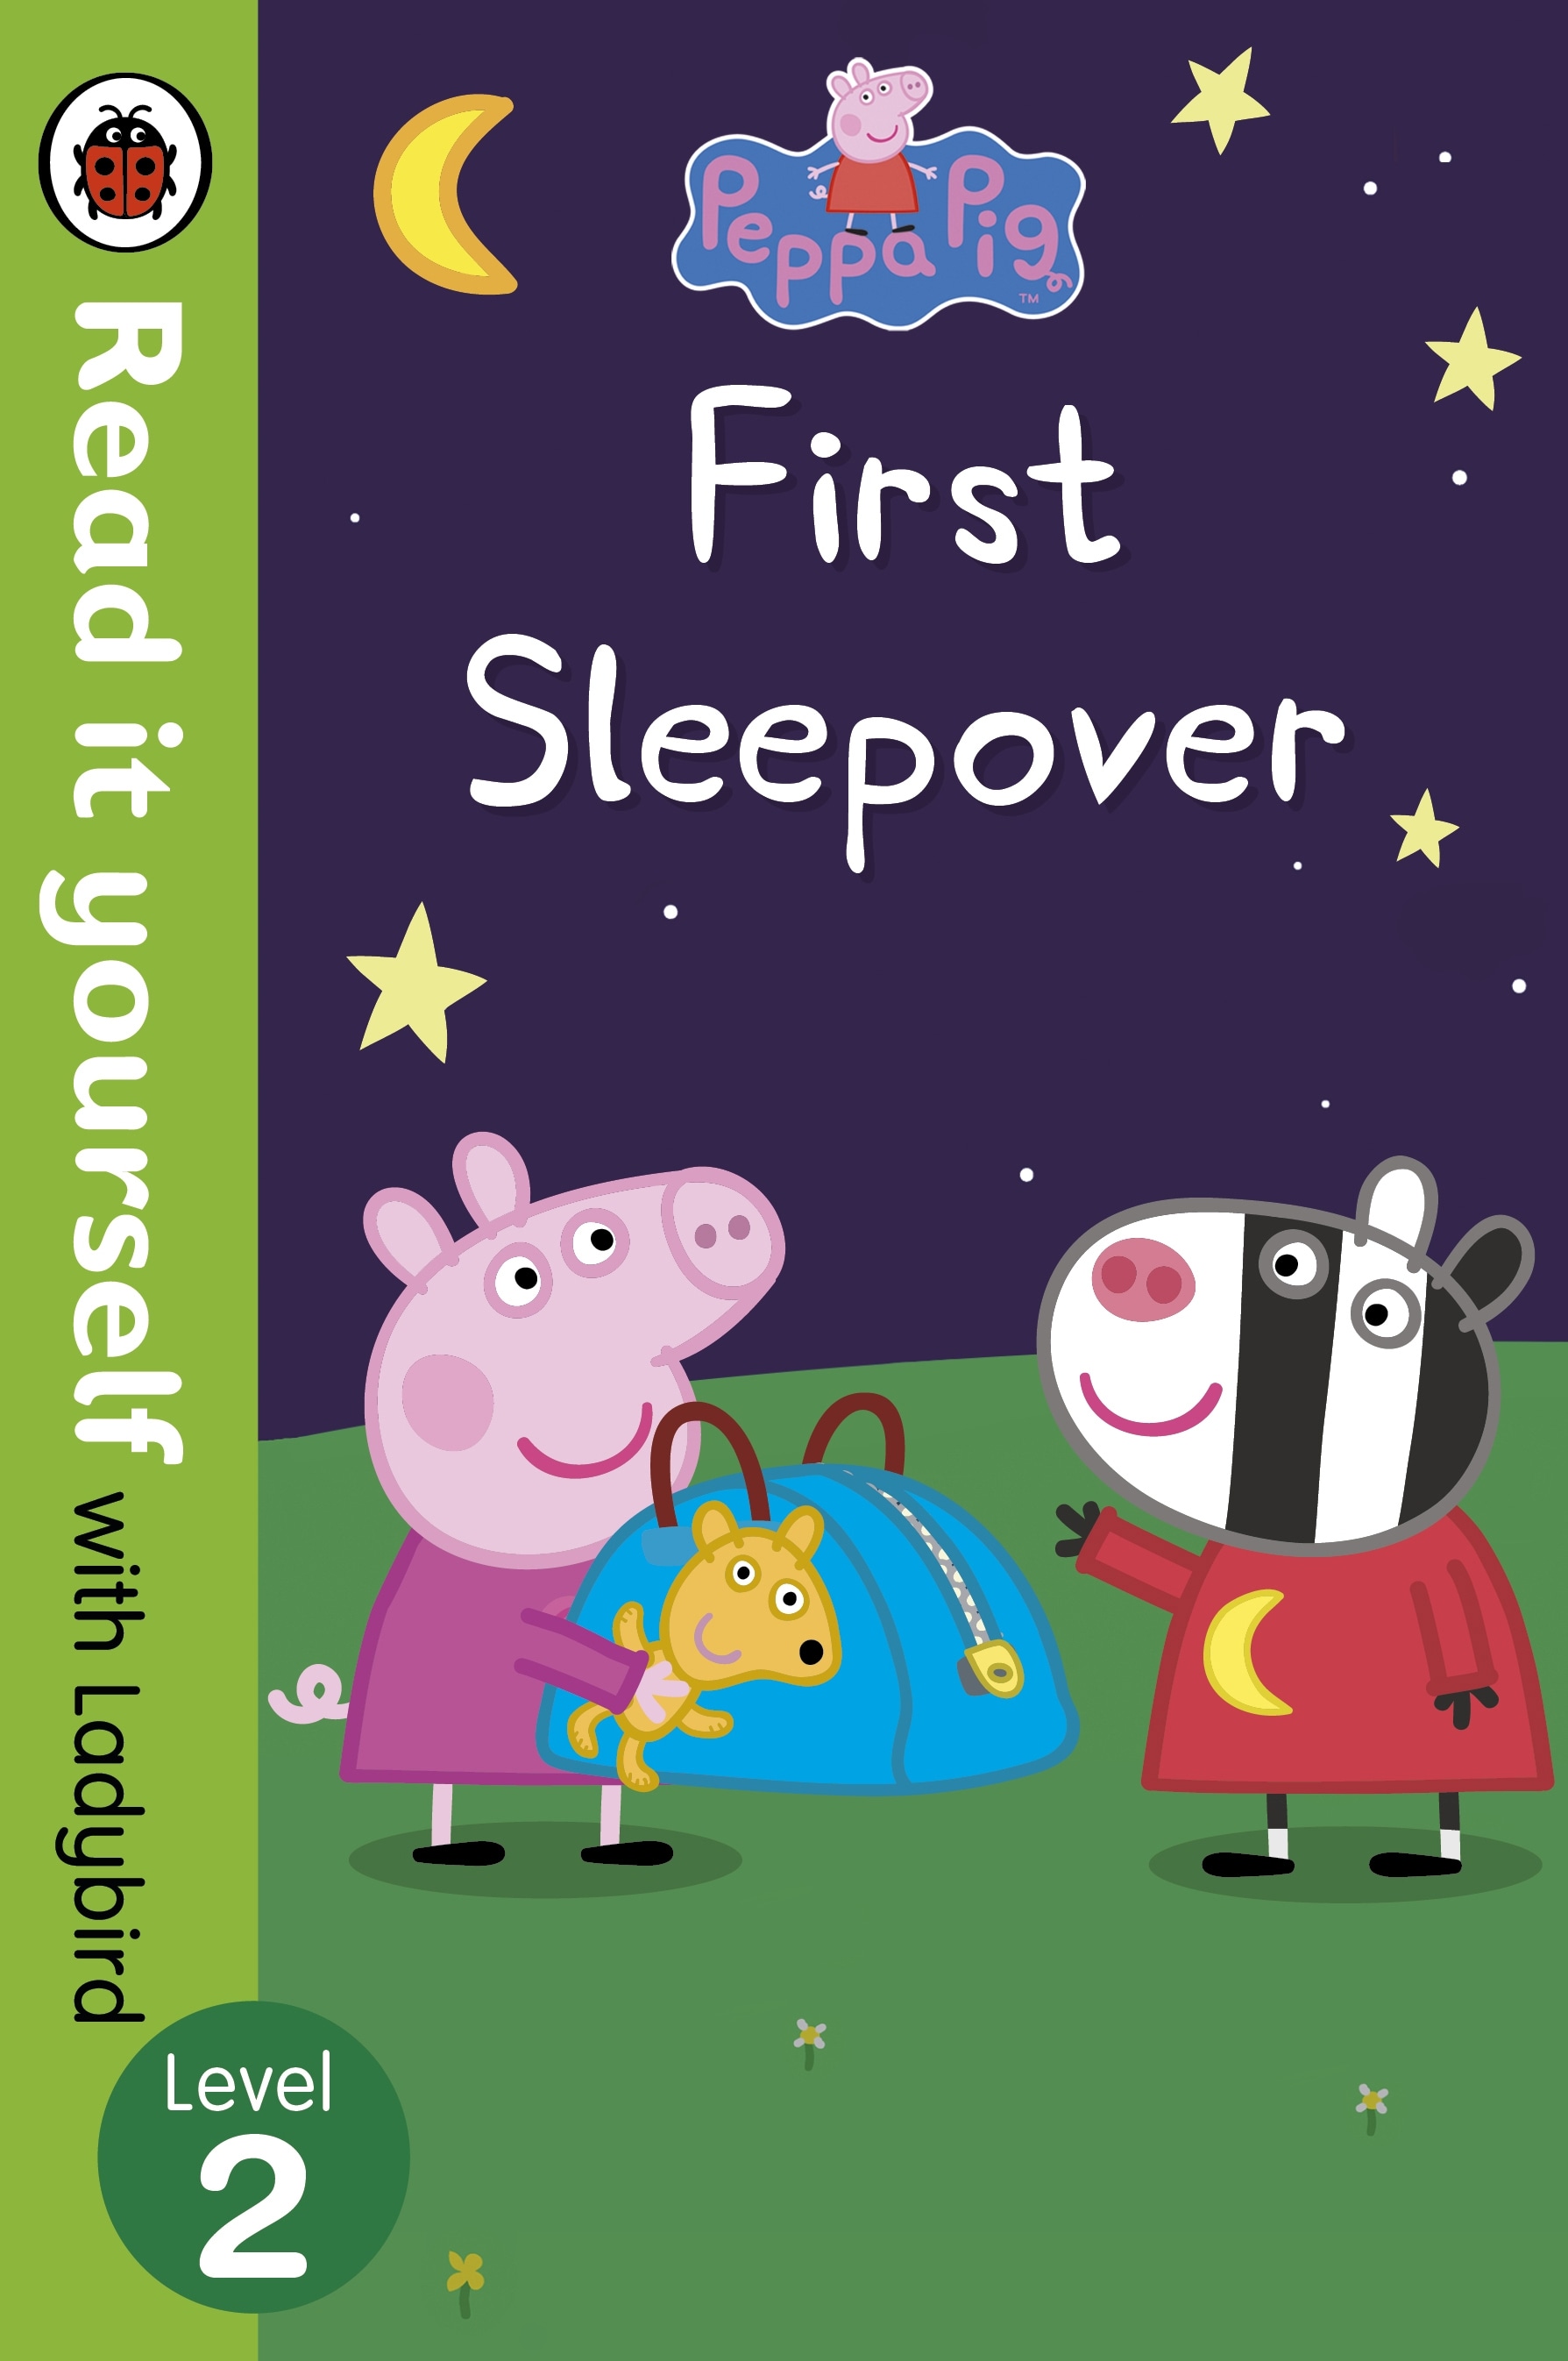 Book “Peppa Pig: First Sleepover - Read It Yourself with Ladybird Level 2” by Ladybird, Peppa Pig — July 7, 2016